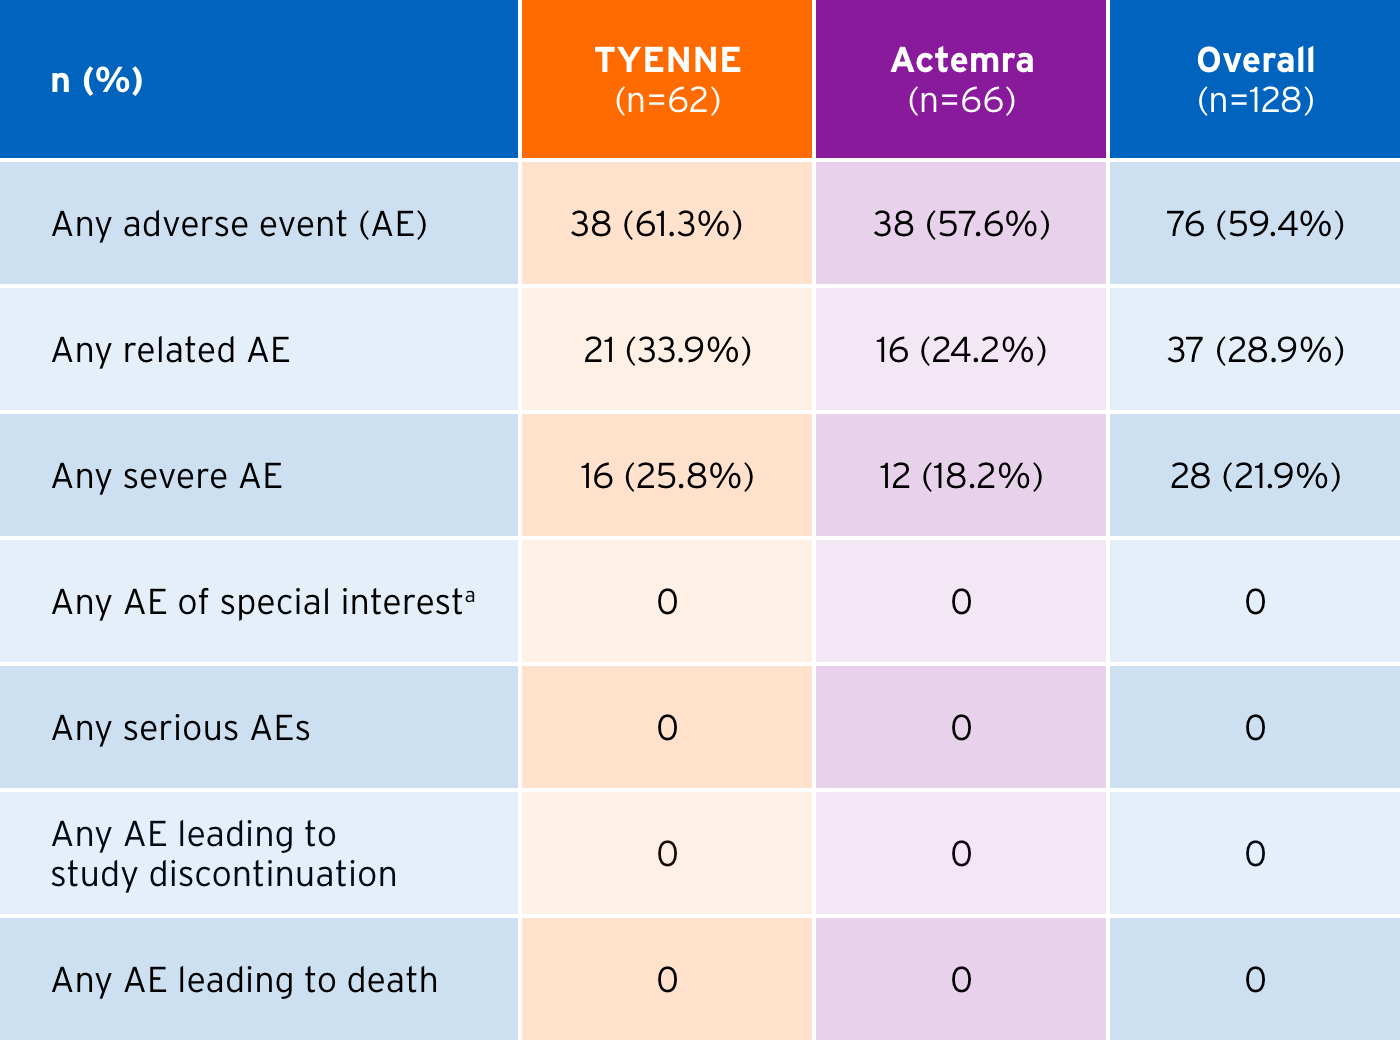 A table showing adverse event (AE) data for TYENNE, resulting in safety and tolerability highly similar to Actemra